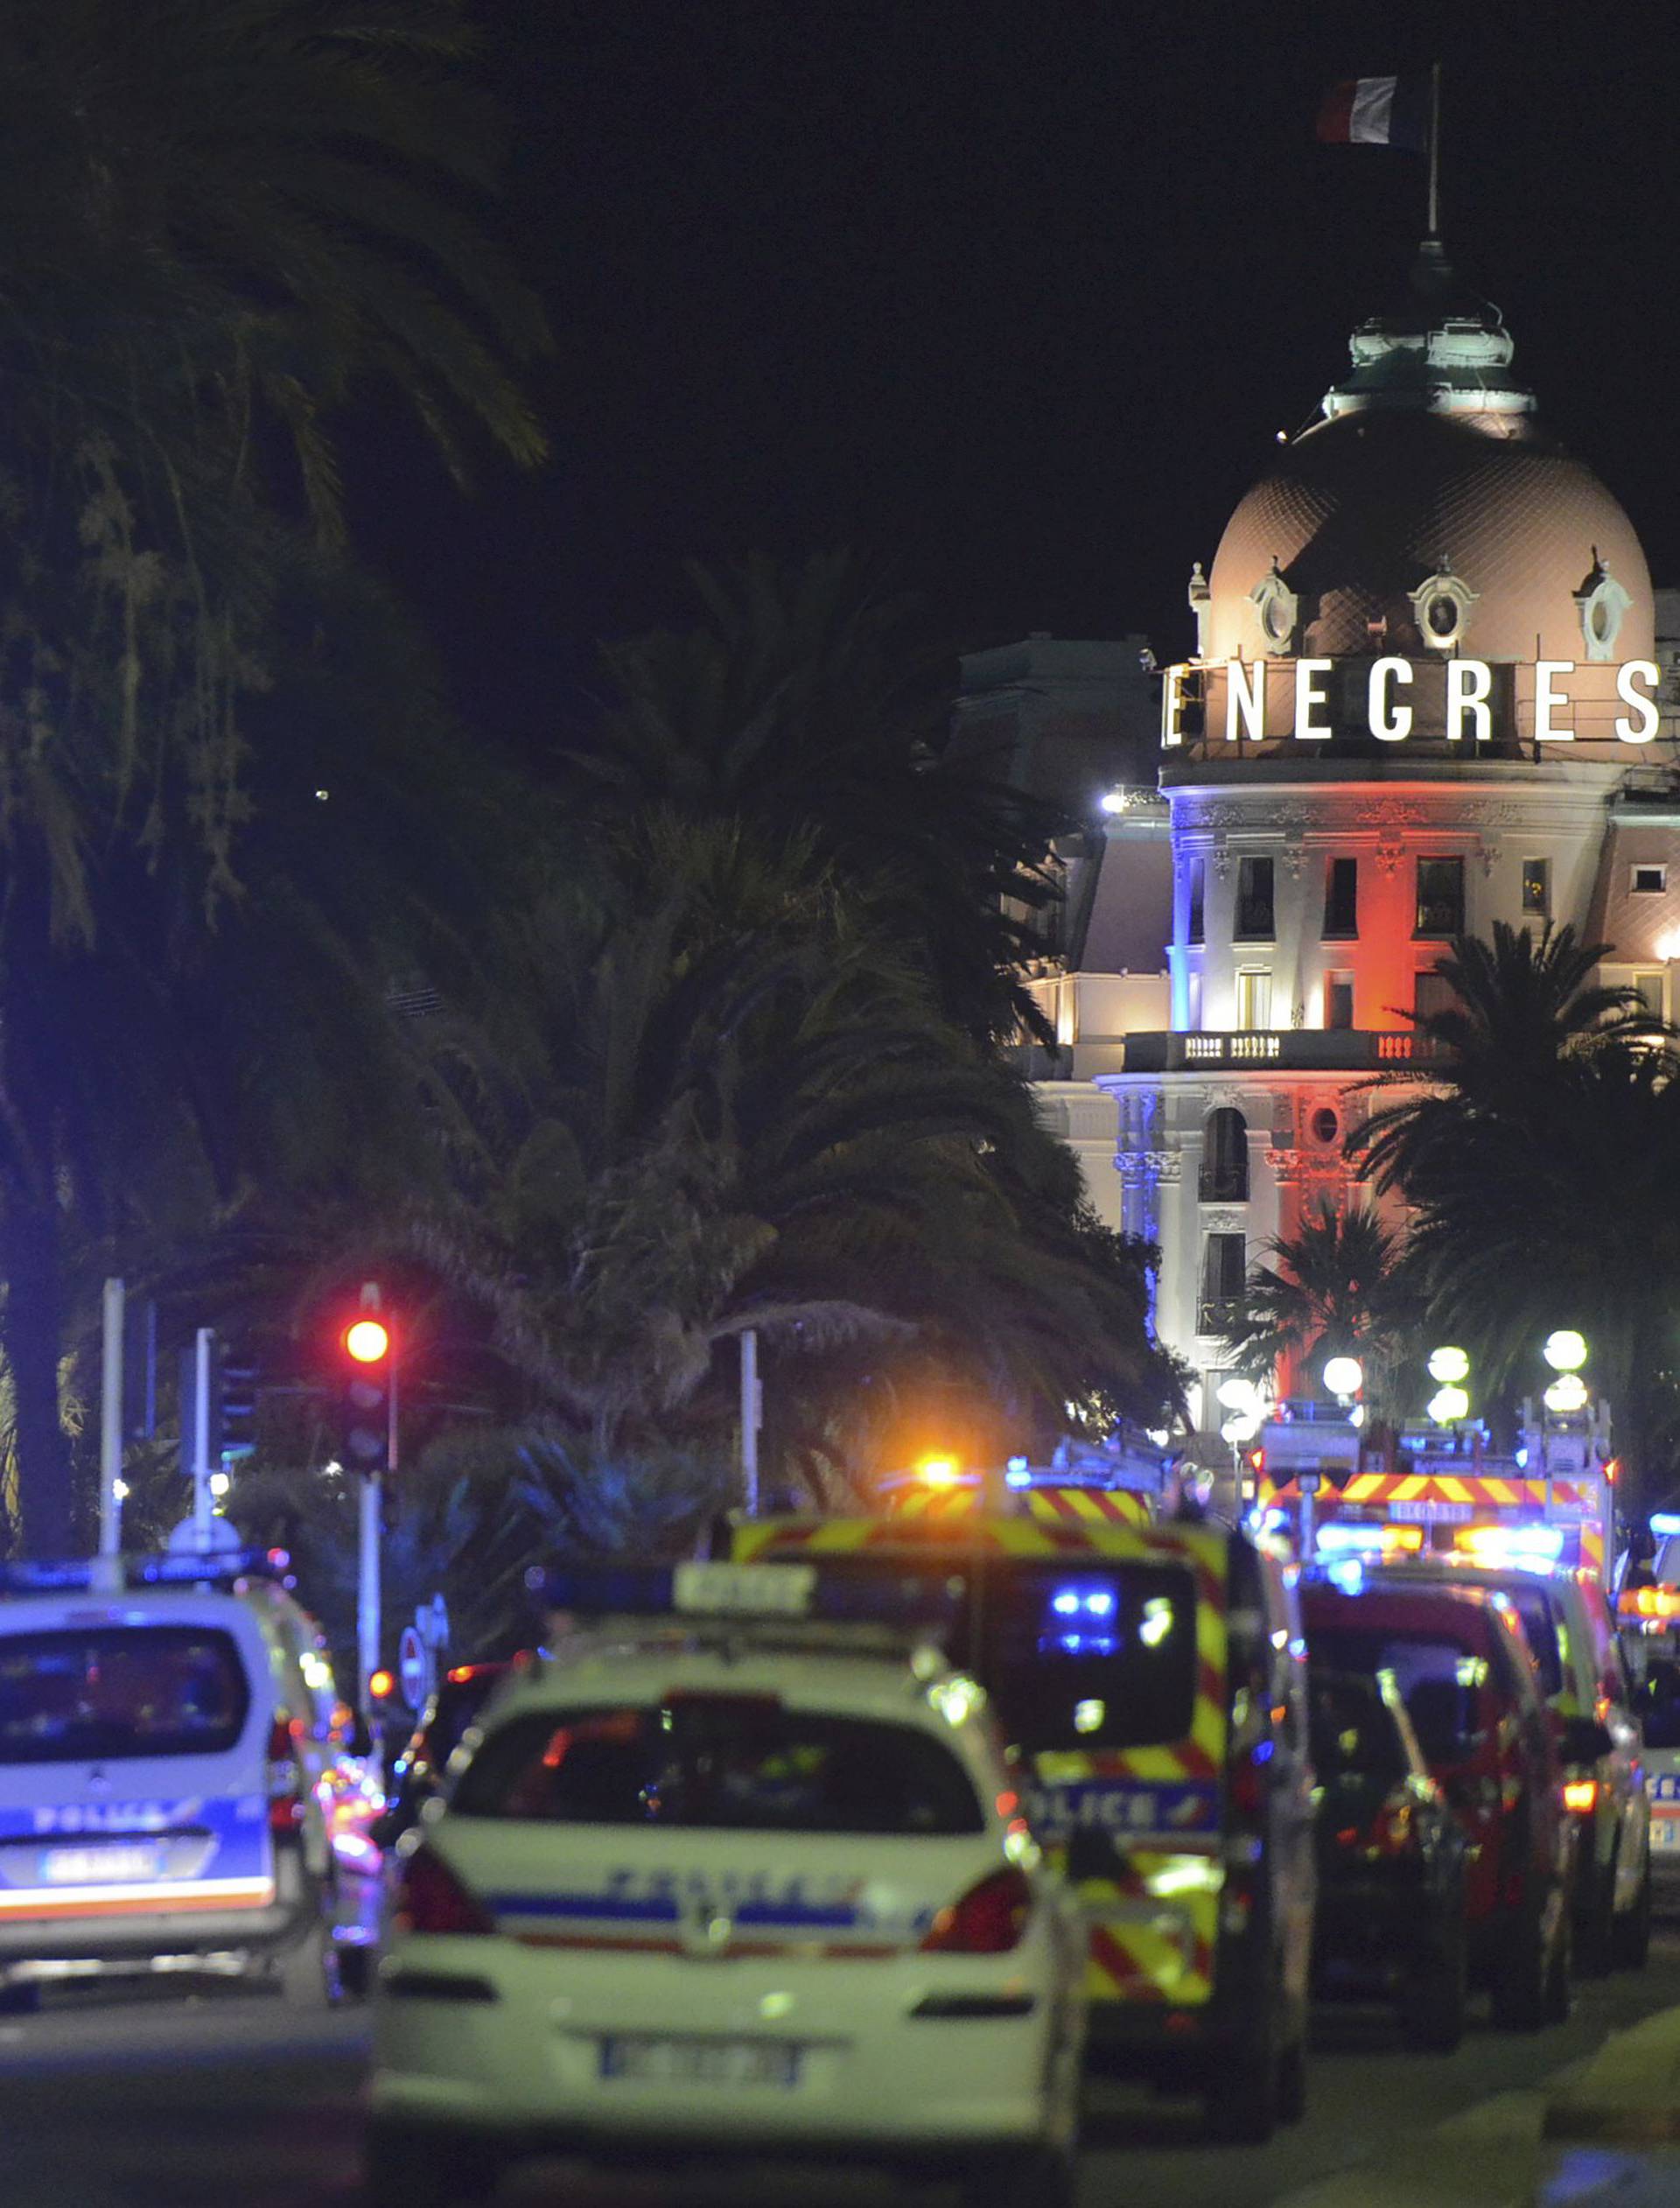 French police and rescue forces vehicles are seen on the Promenade des Anglais after at least 60 people were killed in Nice when a truck ran into a crowd celebrating the Bastille Day national holiday